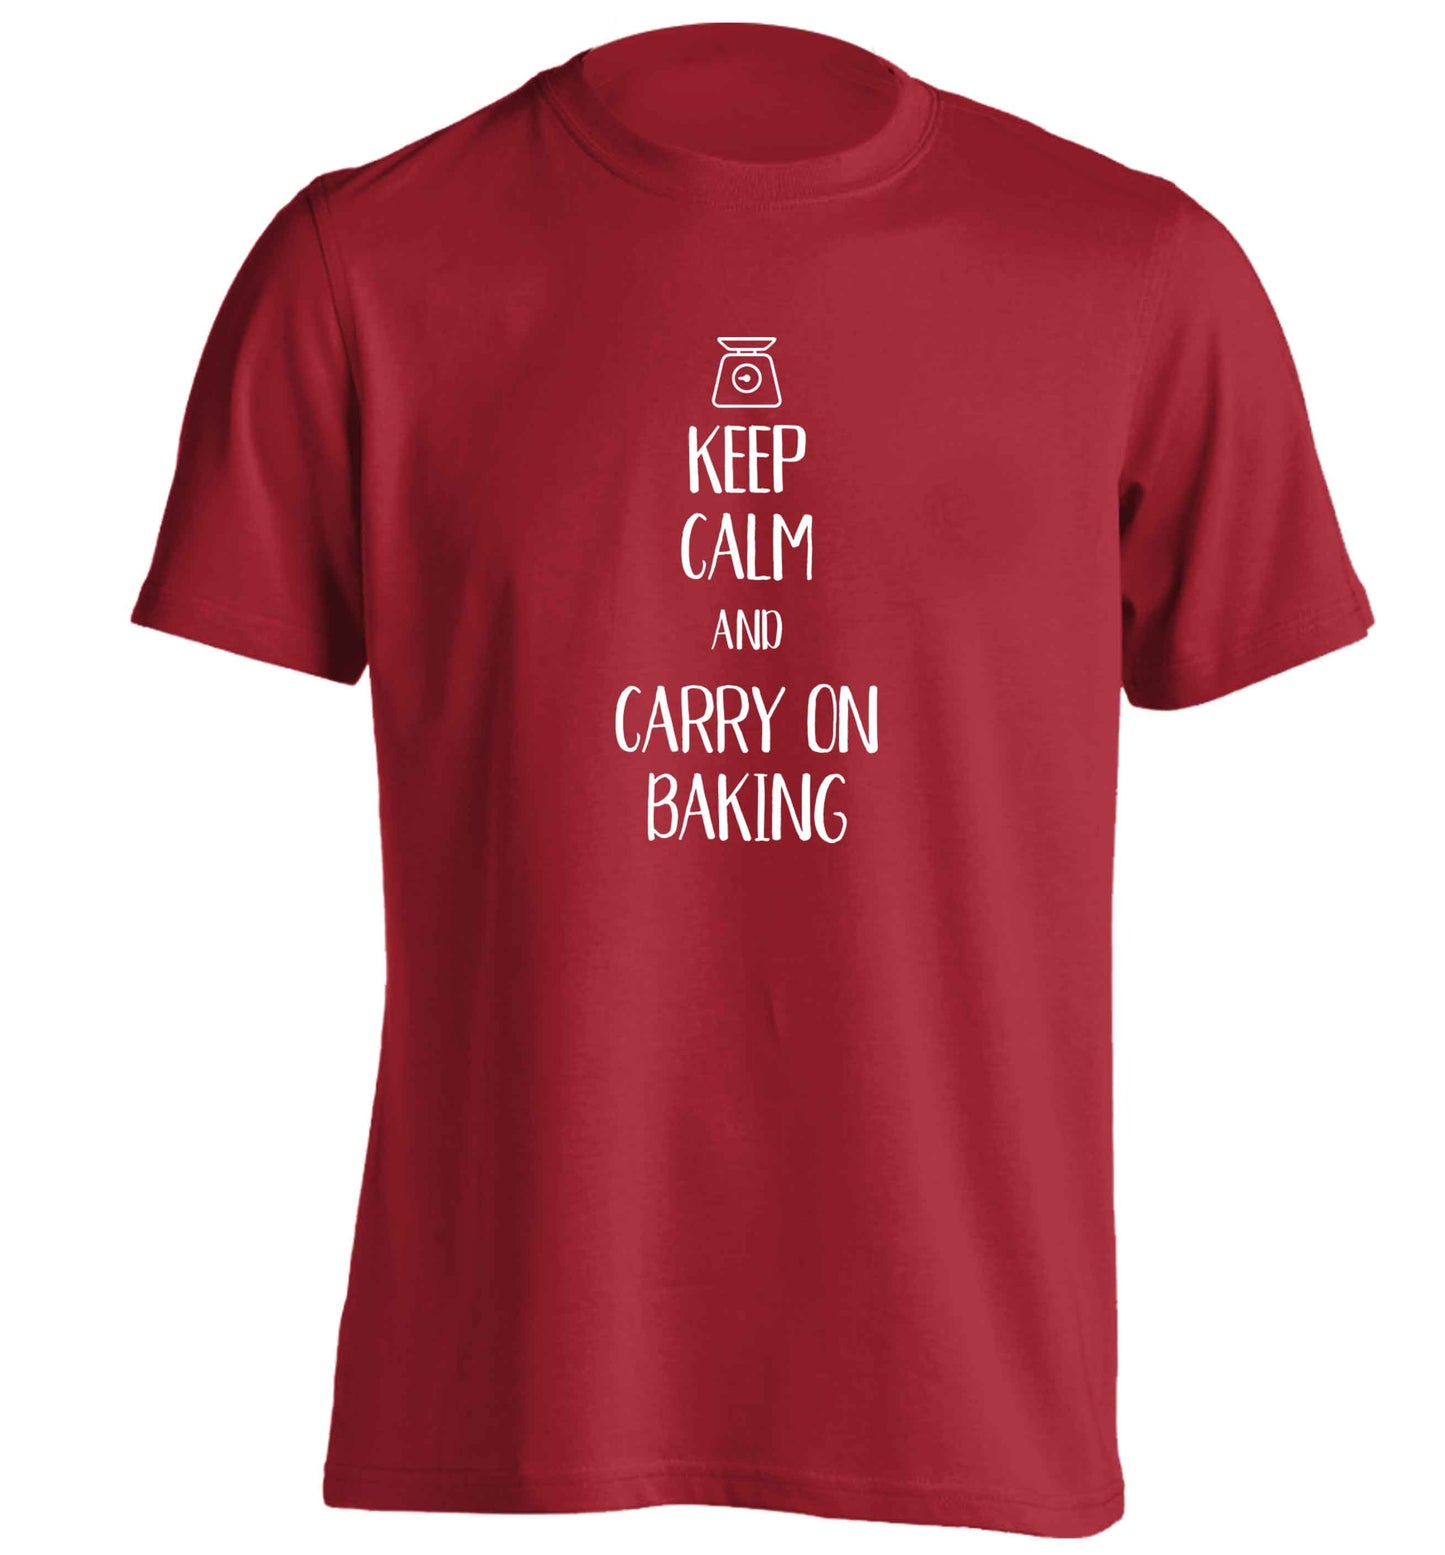 Keep calm and carry on baking adults unisex red Tshirt 2XL